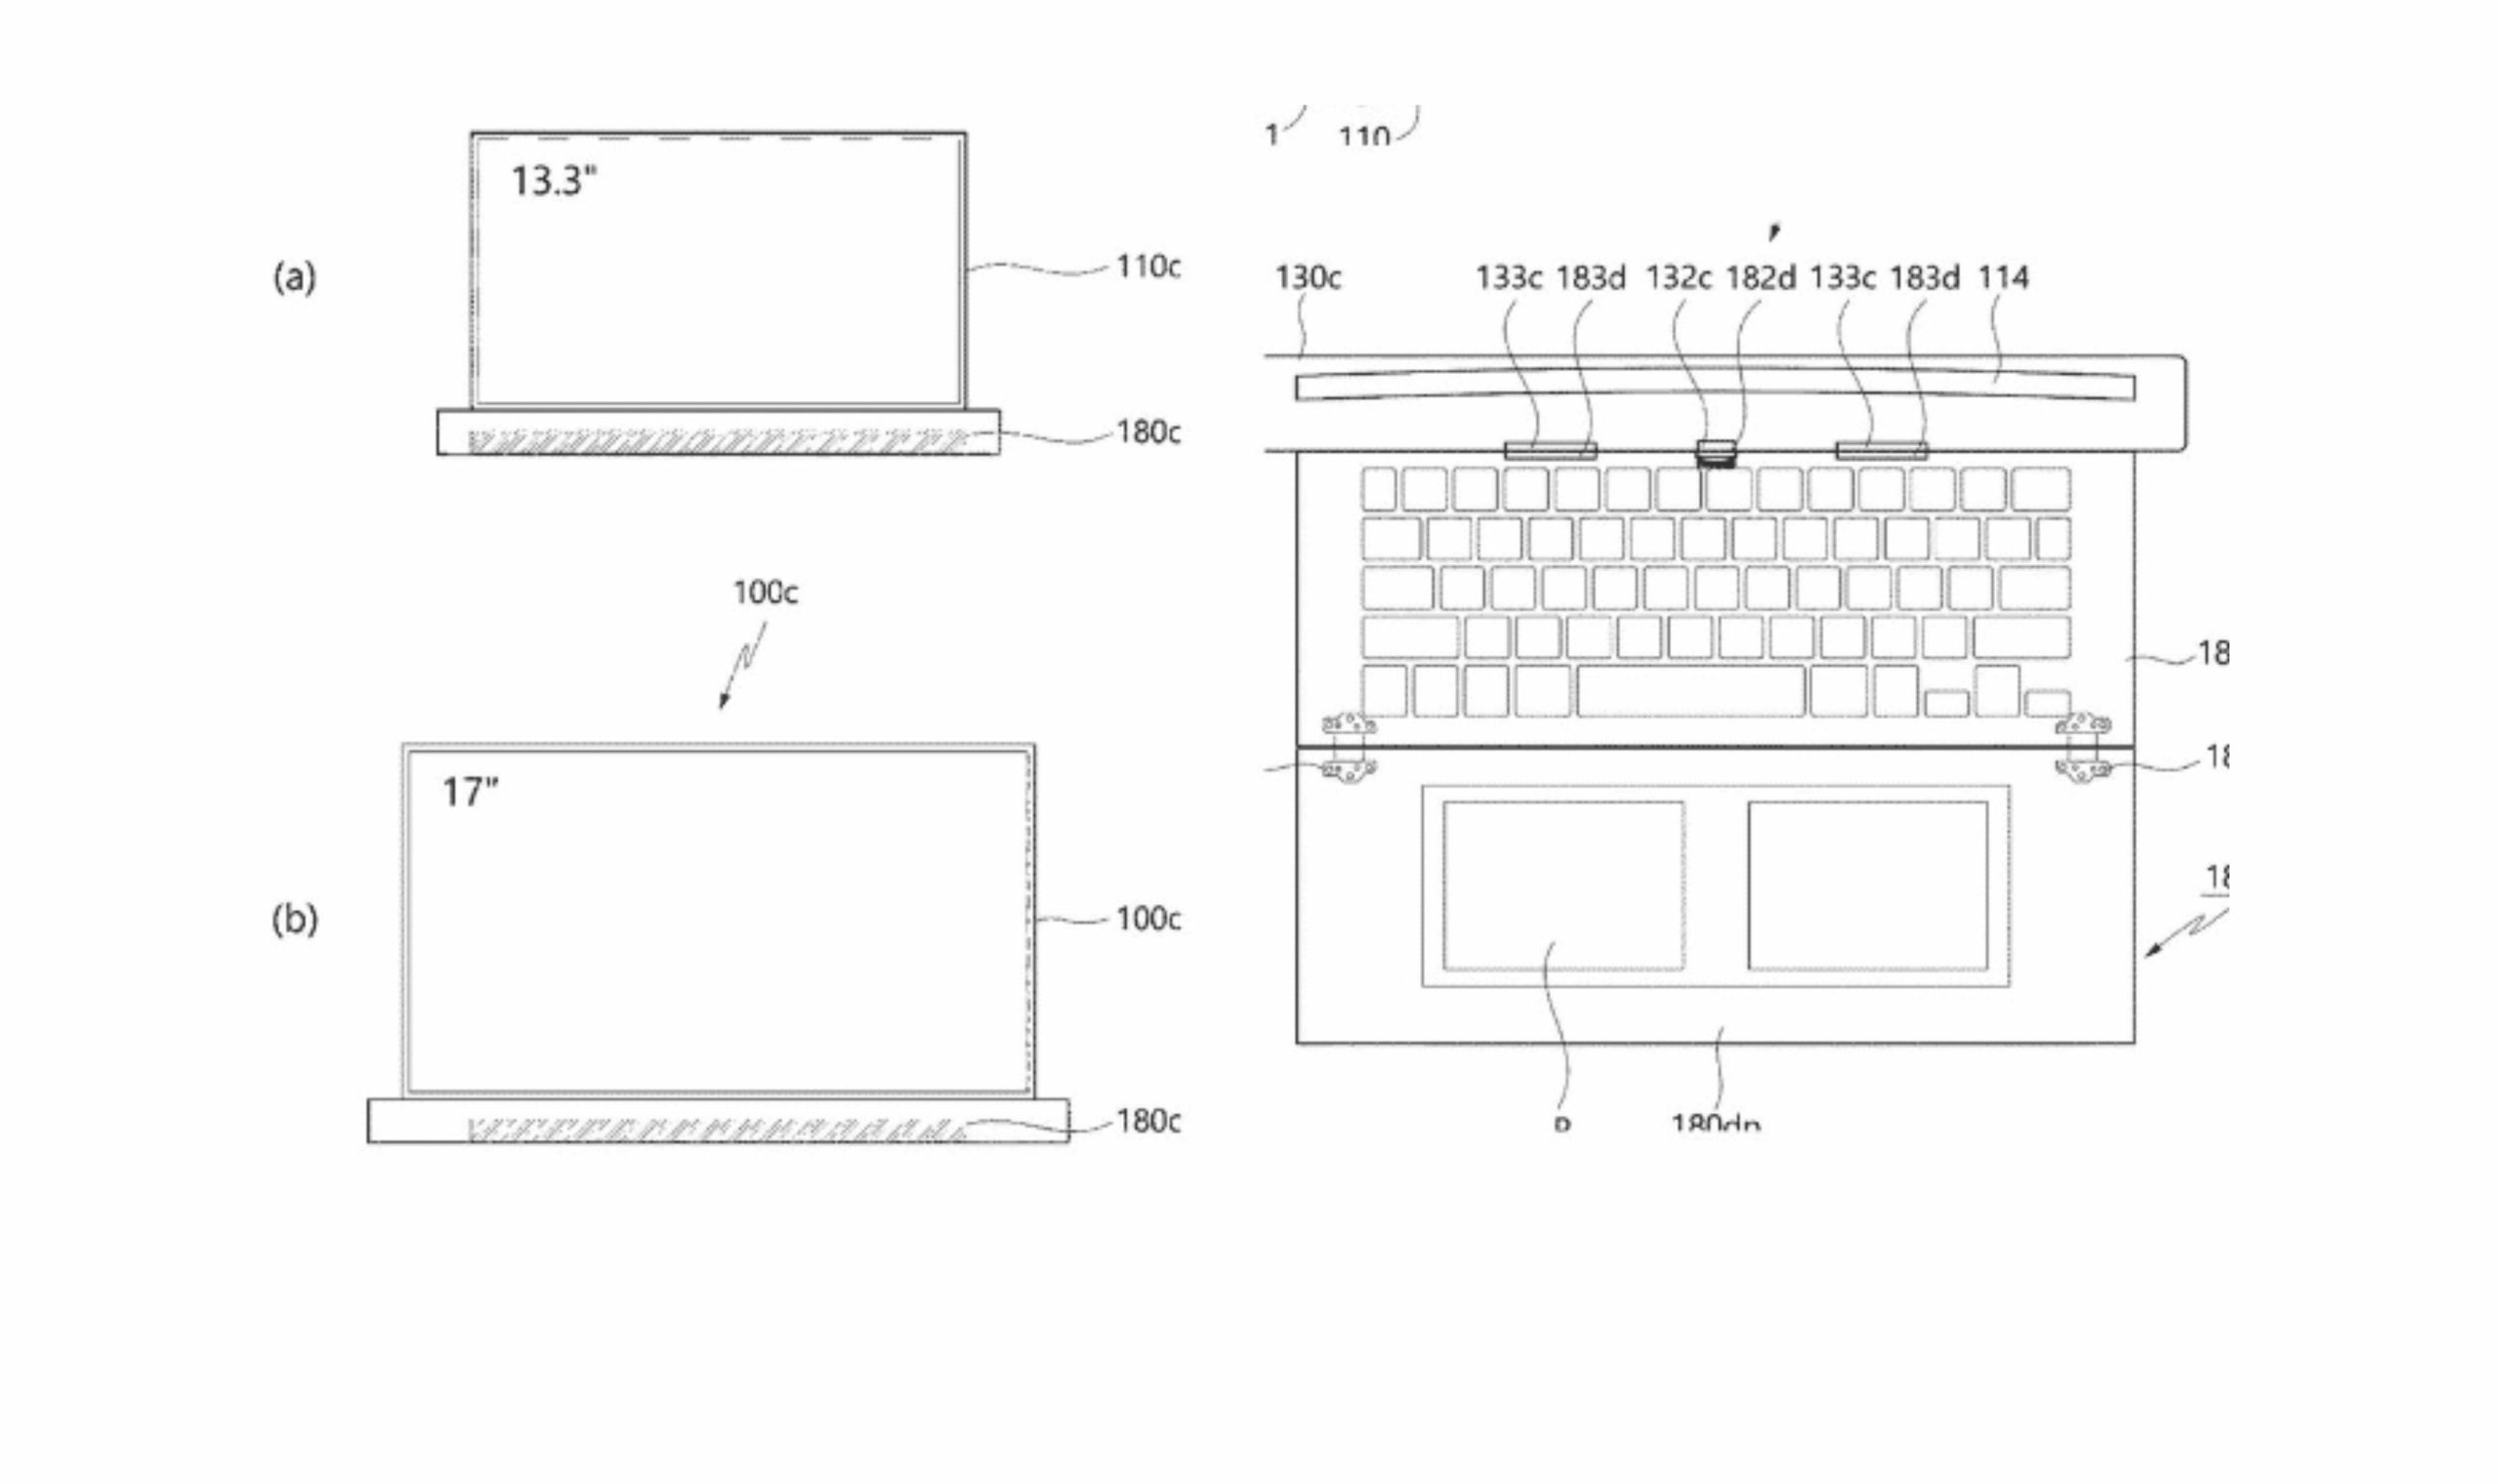 LG patents a laptop design with rollable display and keyboard